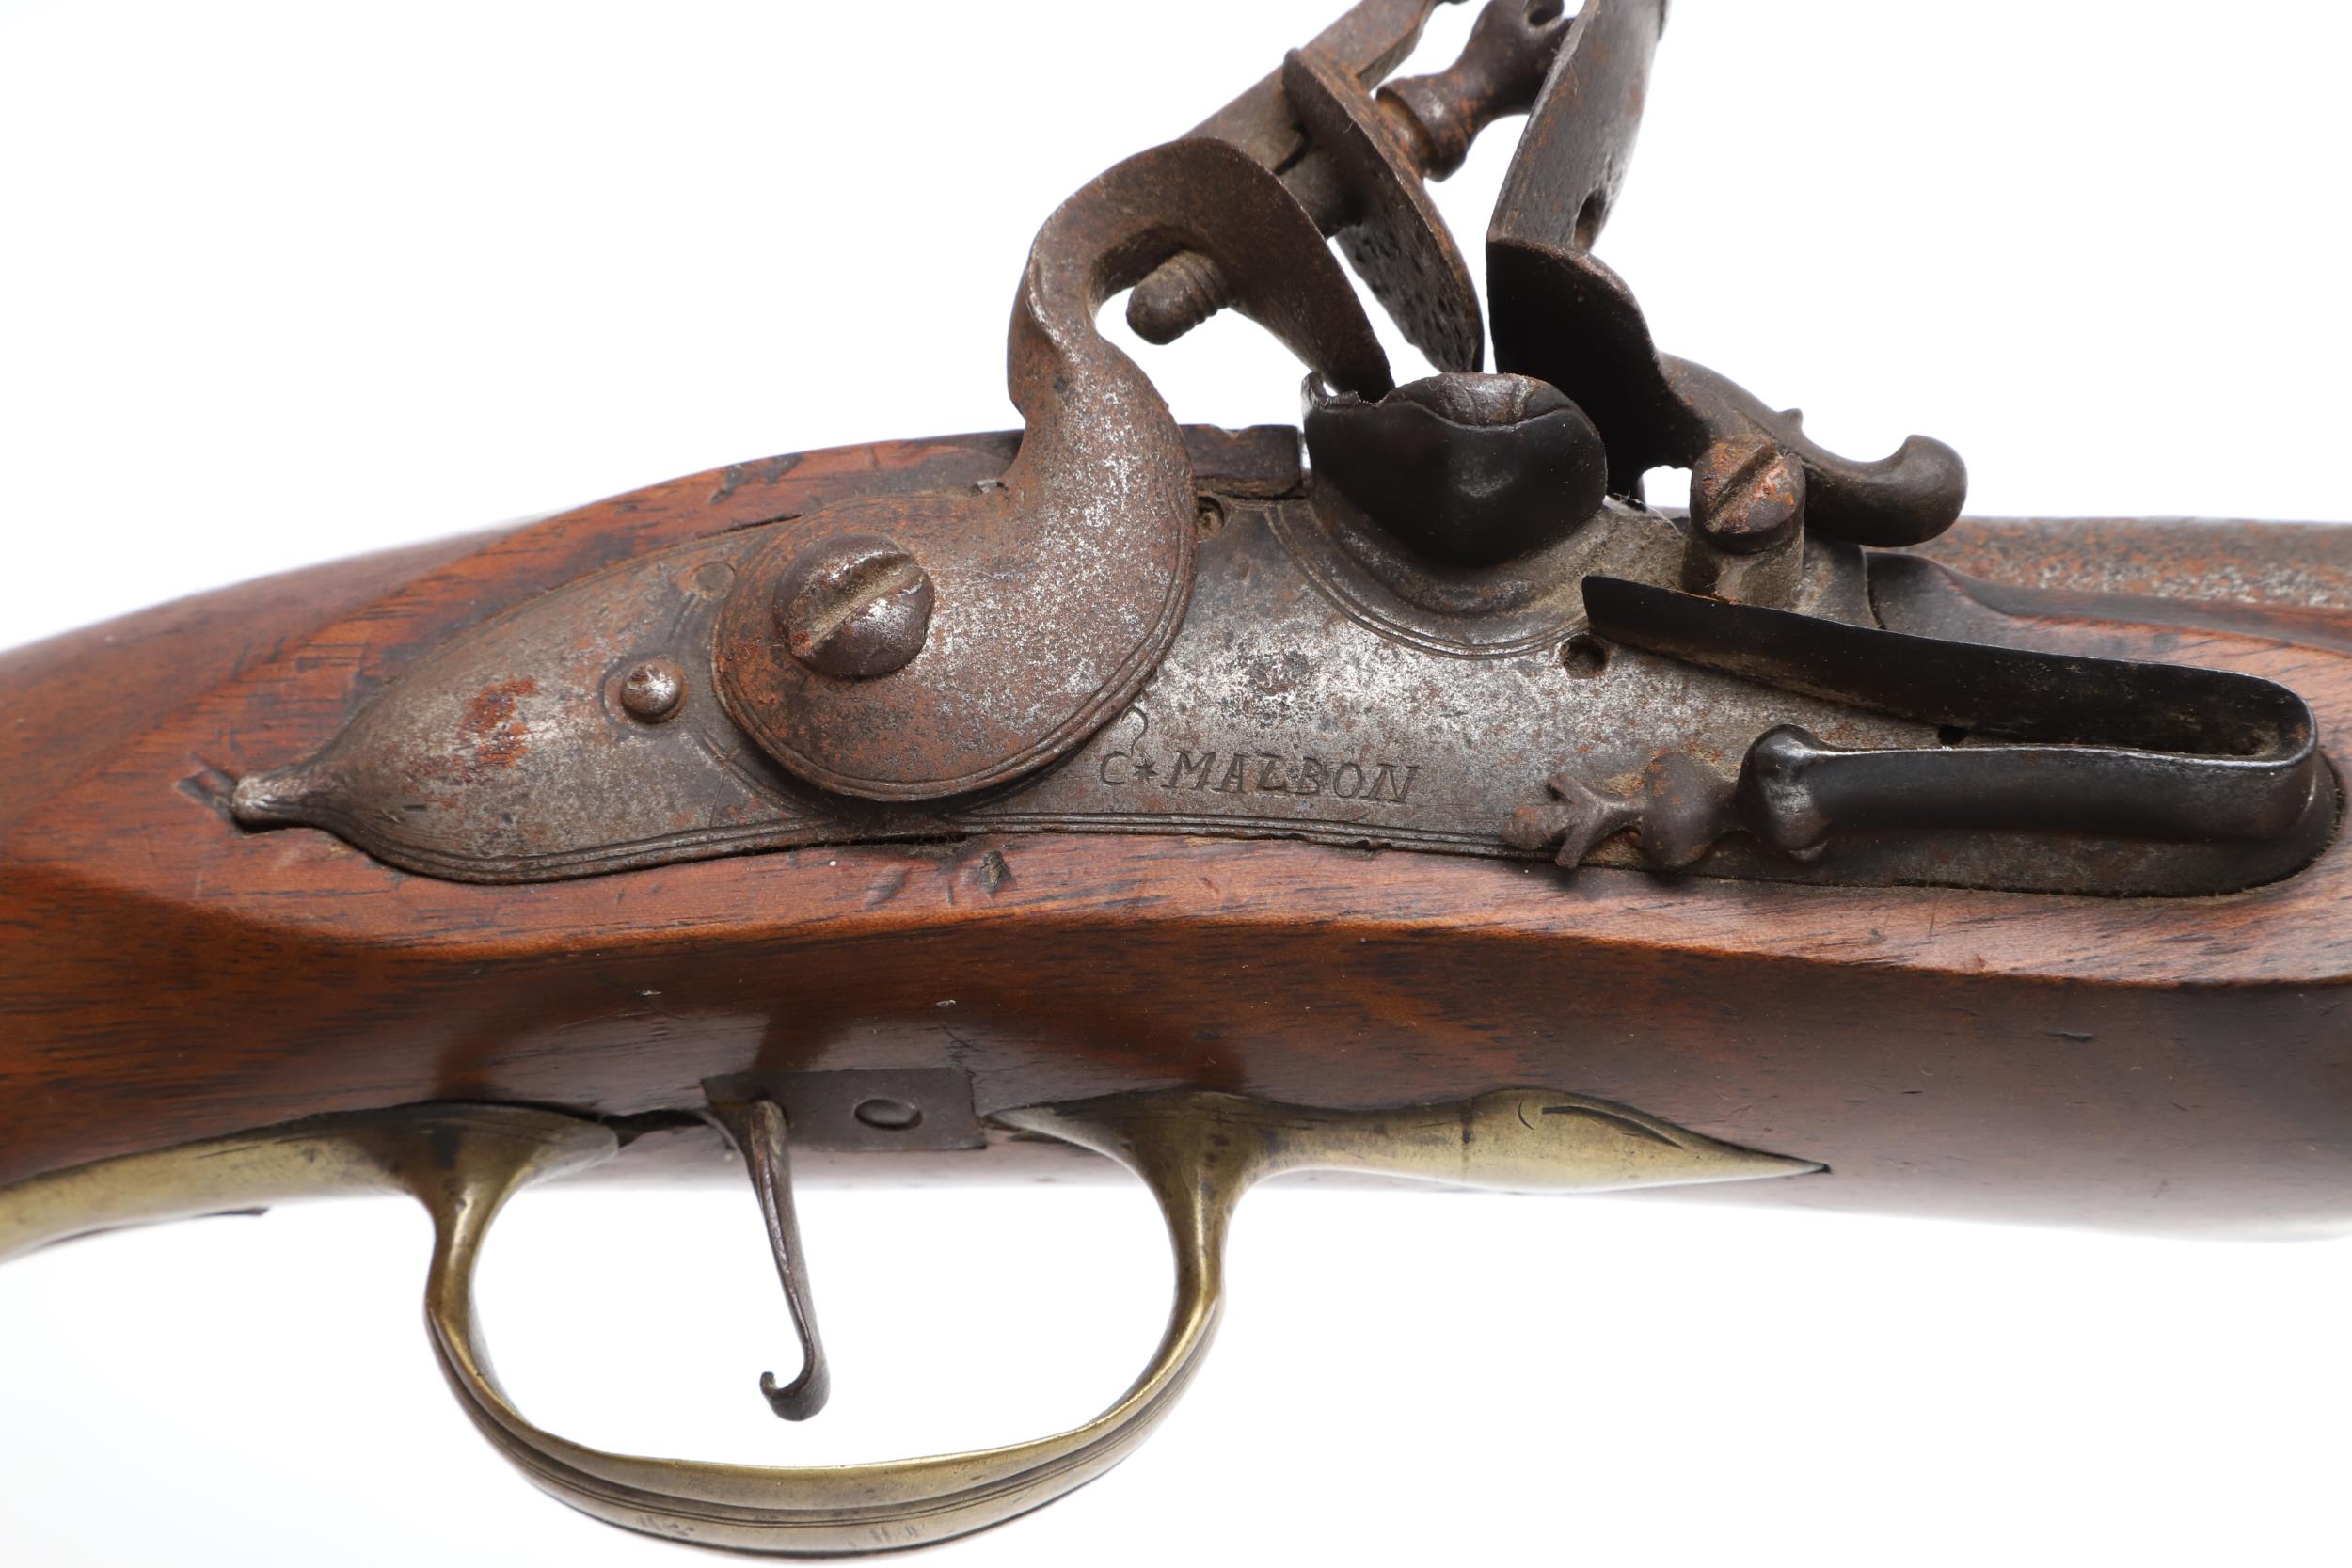 AN EARLY 19TH CENTURY OVERCOAT PISTOL BY C. MALDON. - Image 5 of 10